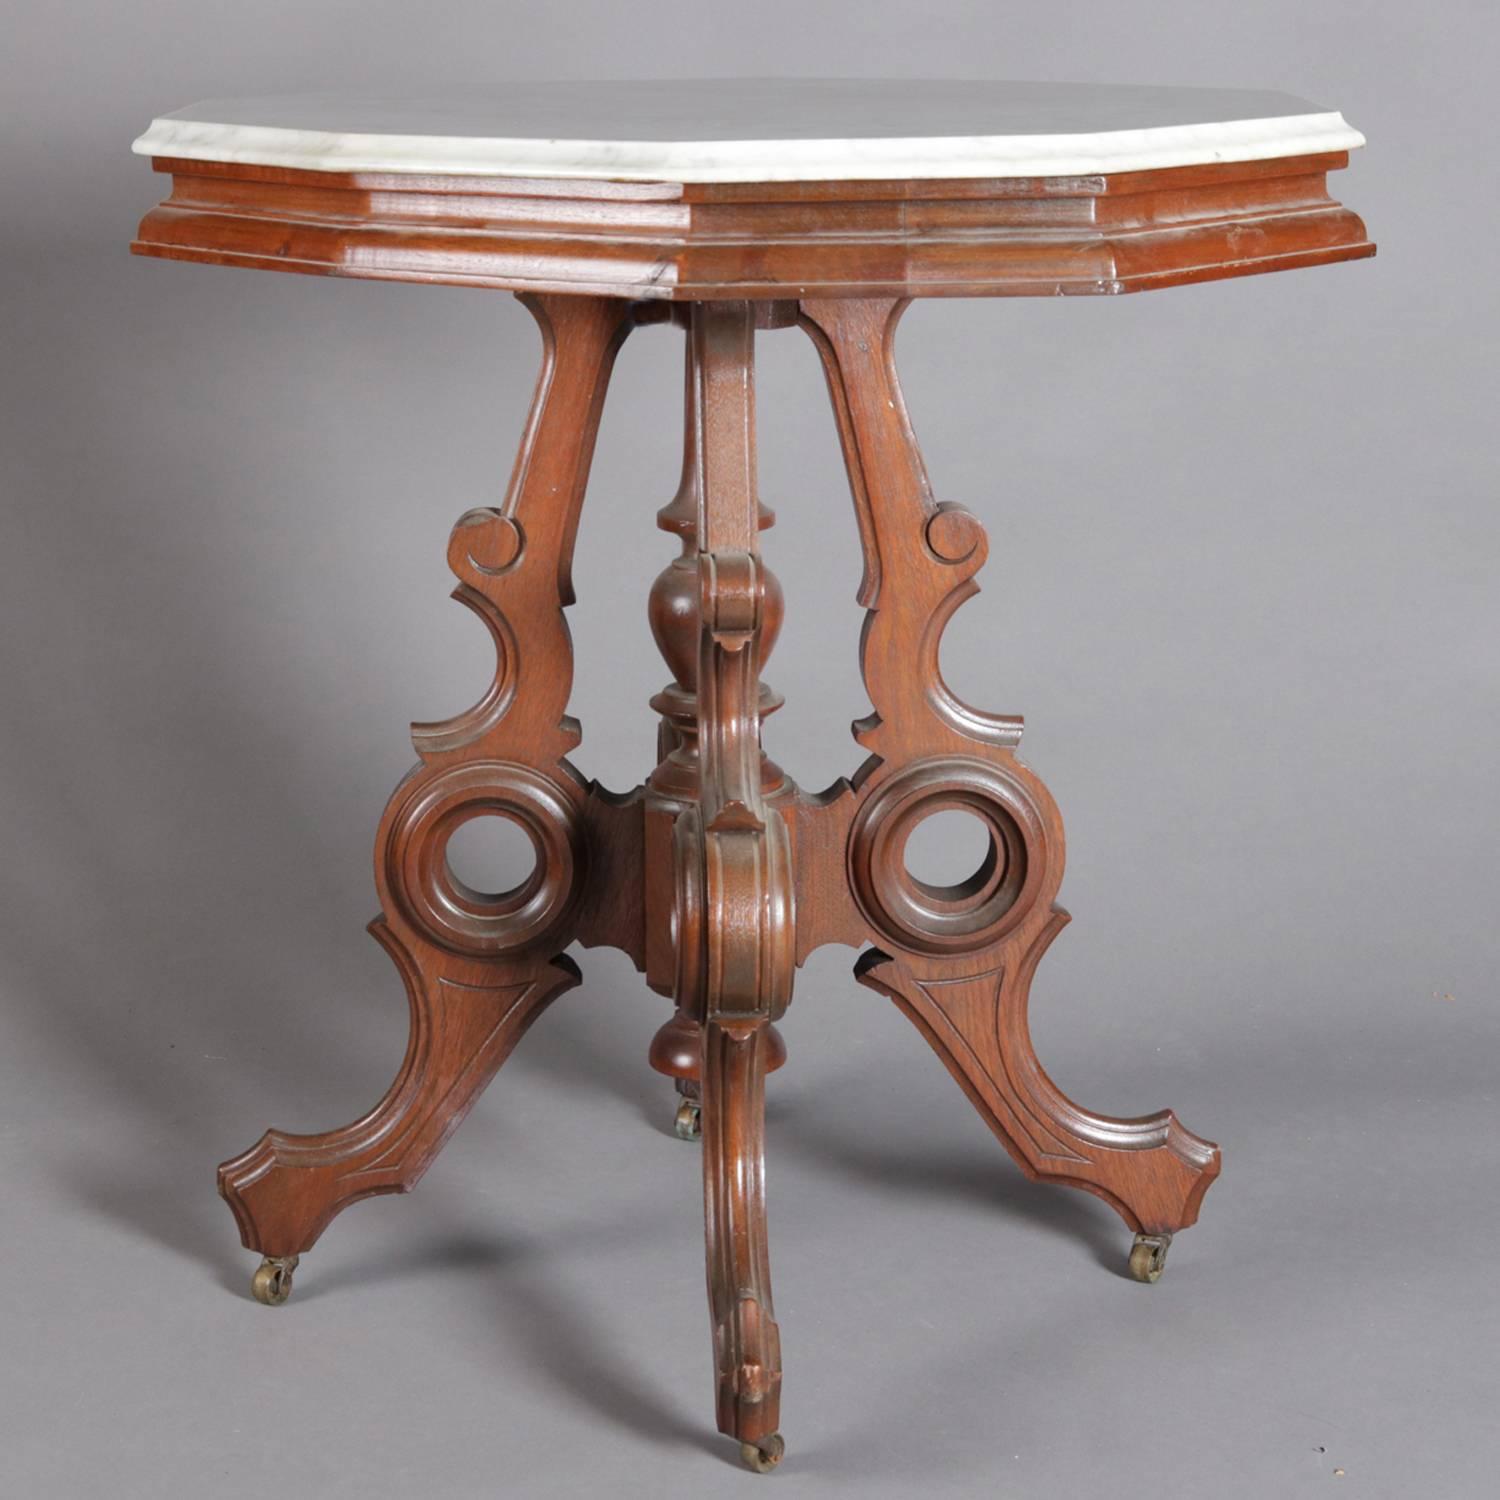 Victorian Eastlake parlor table features beveled marble top above incised and carved and pierced walnut base with incised decorated stylized scroll form legs with turned center plinth, 19th century

***DELIVERY NOTICE – Due to COVID-19 we are